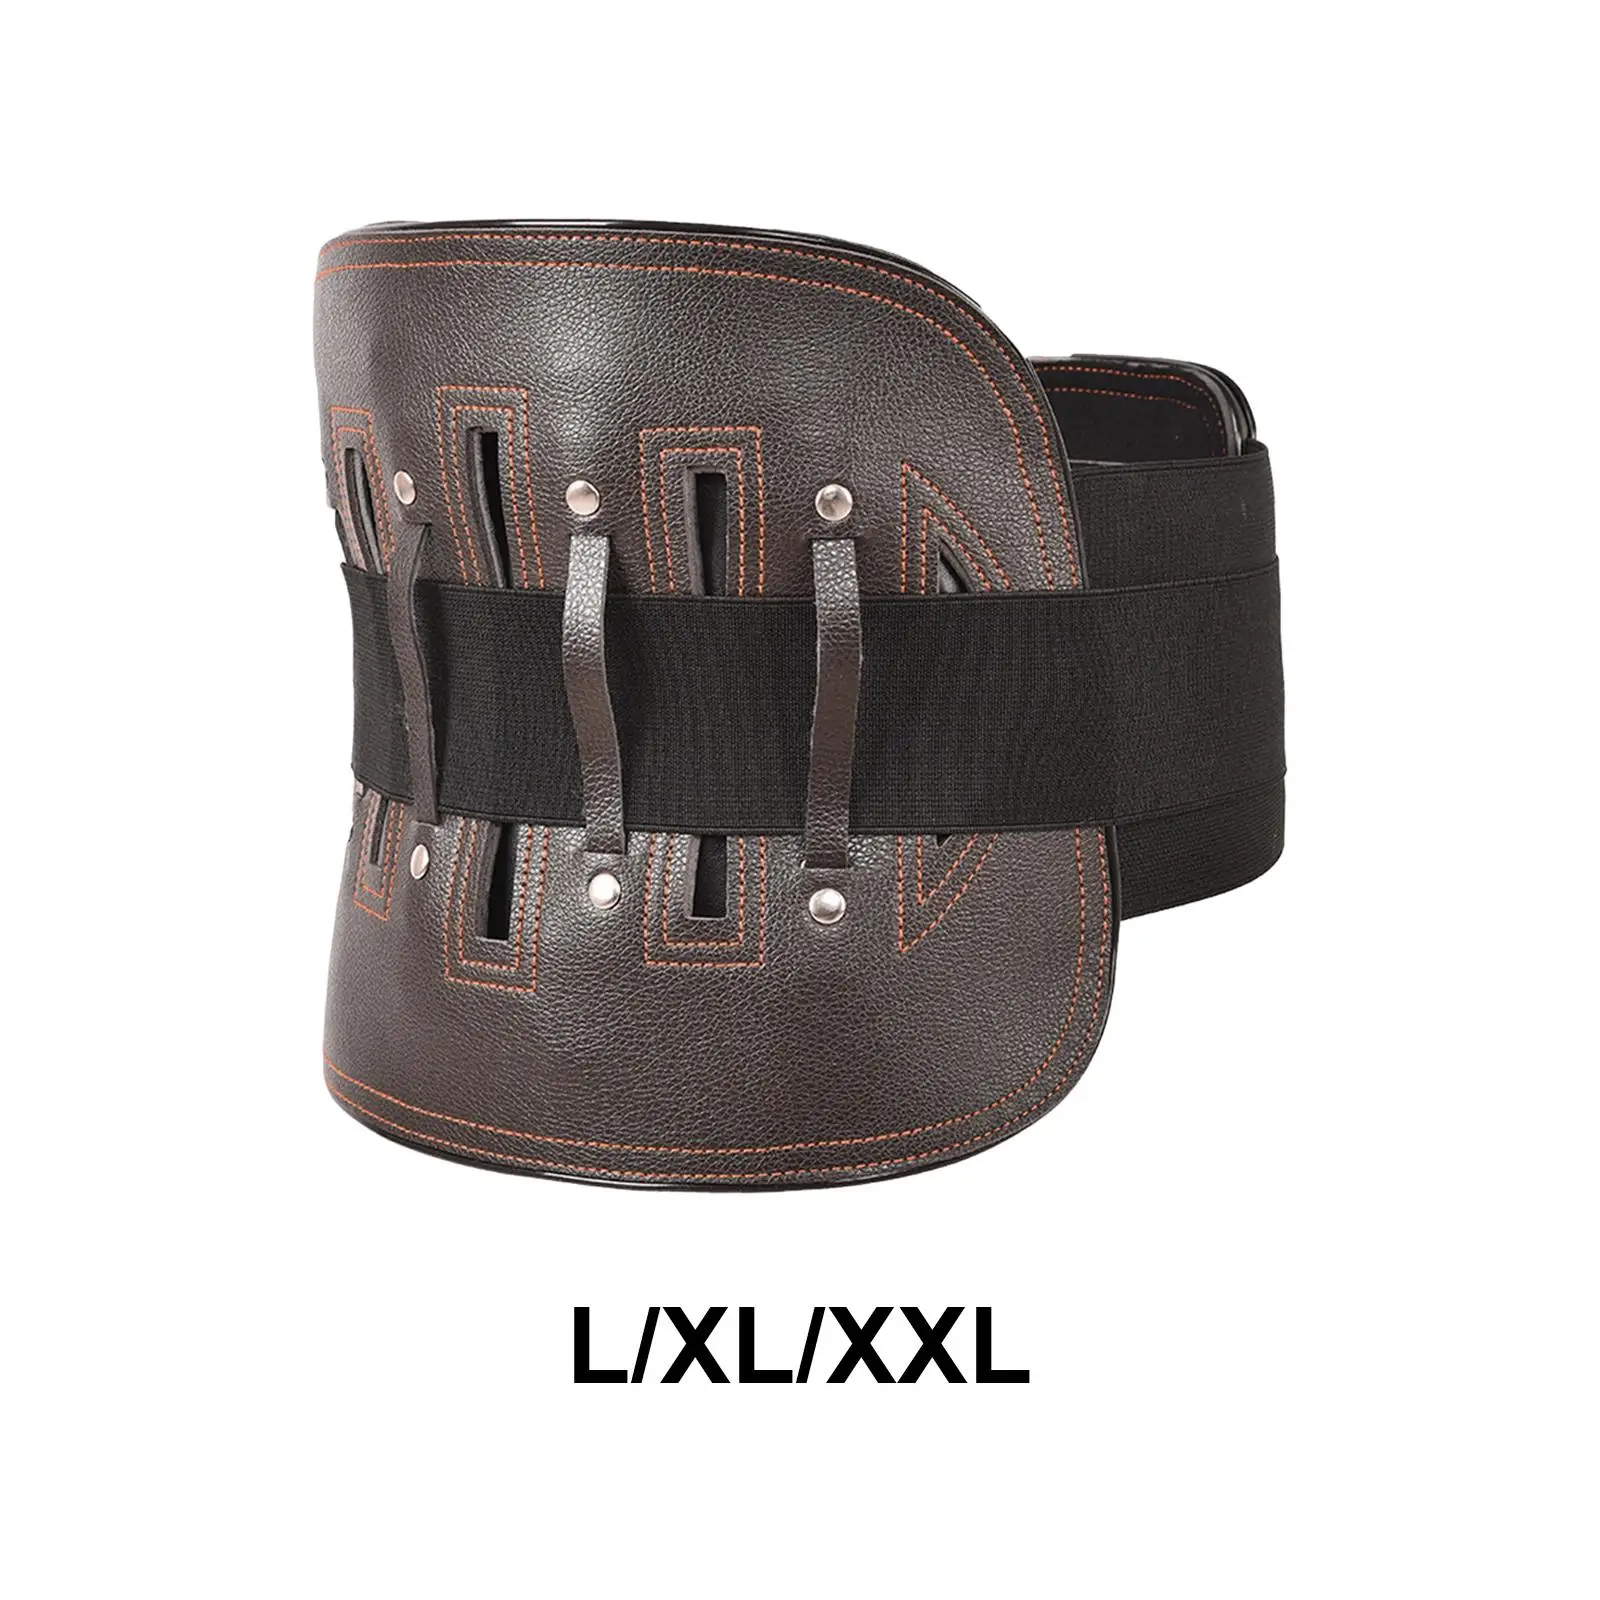  Belt Lower , Adjustable Strap for Herniated Disc Scoliosis  Corset